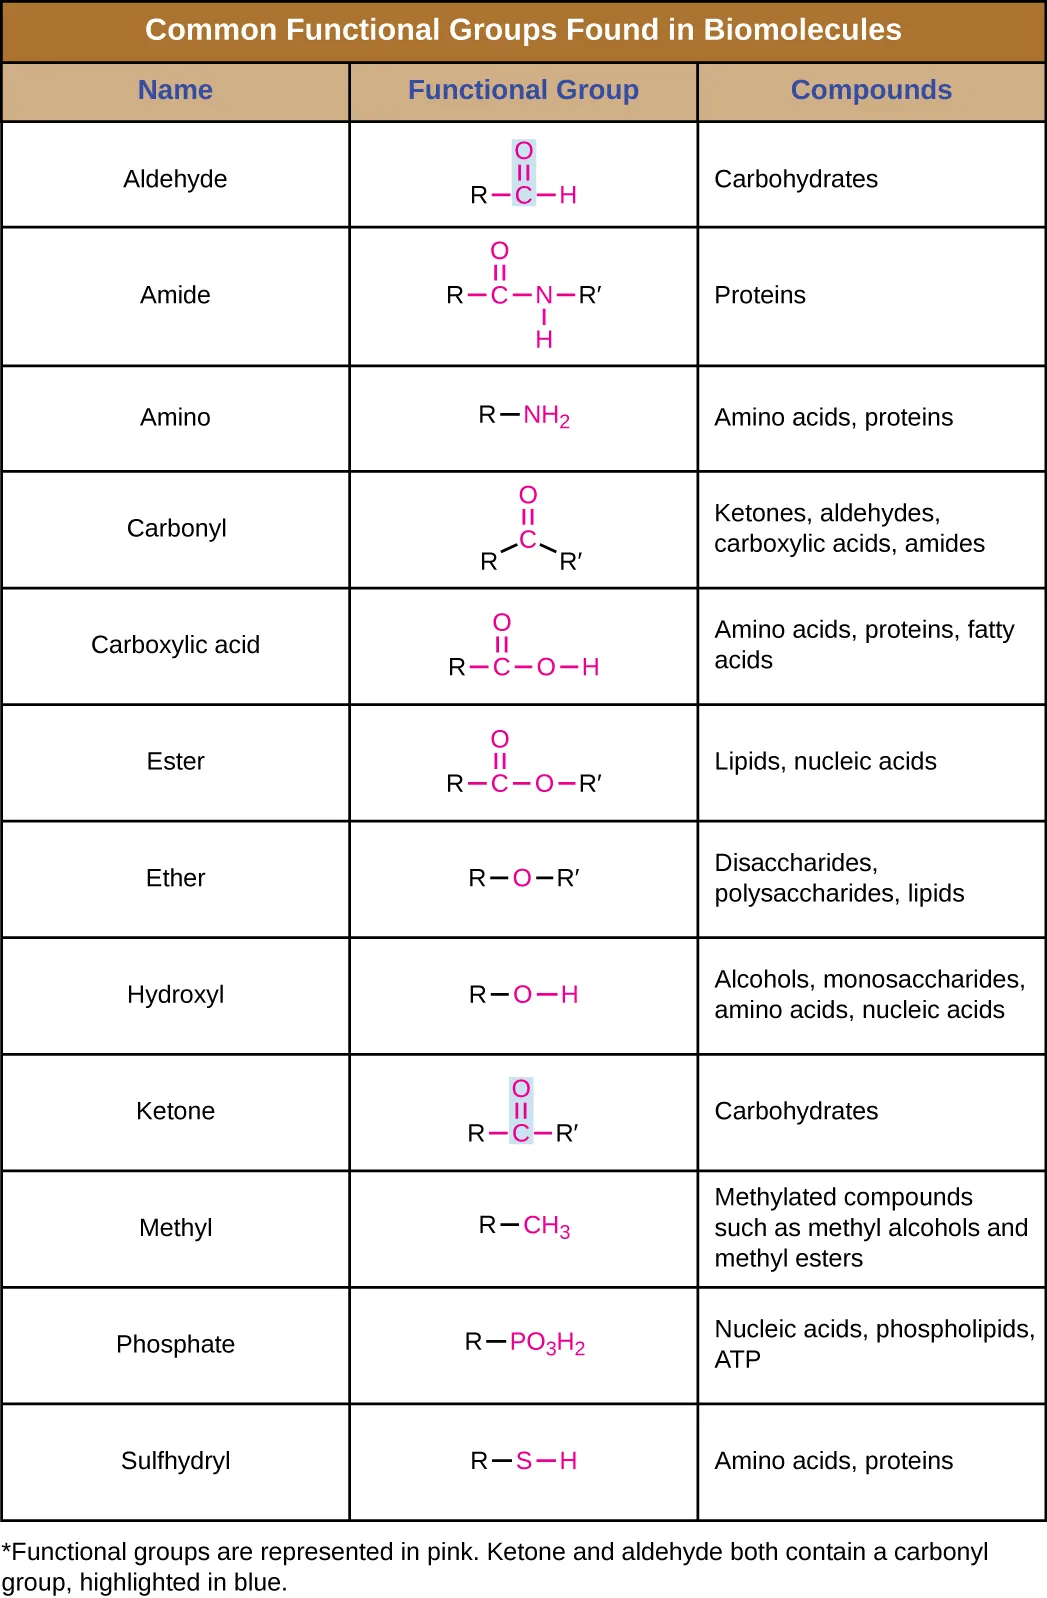 Table titled: Common functional groups found in biomolecules; 3 columns, name, functional group and class of compound.  Aldehyde has a red C  double bonded O and an H; the C is also bound to a black R. This is found in carbohydrates. Amine has a red C double bonded to an O and single bonded to an NH. The C and the N are each also bound to a black R. This is found in proteins. Amino has a red NH2 bound to a black R. This is found in amino acids and proteins. Phosphate has a red PO3H2; the P is also bound to a black R. This is found in nucleic acids, phospholipids and ATP. Carbonyl has a red C double bonded to an O; the C is also bound to 2 black Rs. This is found in ketones, aldehydes, carboxylic acids, amides. Carboxylic acid has a red C double bonded to an O and to an OH; the C is also bound to a black R. This is found in amino acids, proteins, and fatty acids. Ester has a red C double bonded to an O and single bonded to another O. The C is bound to a black R and the single bonded O is also bound to a black R. This is found in lipids and nucleic acids. Ether has a red O bound to 2 black Rs. This is found in disaccharides, polysaccharides, and lipids. Hydroxyl has a red OH bound to a black R; this is found in alcohols, monosaccharides, amino acids, and nucleic acids. Ketone has a red C double bonded to an O; the C is also bound to 2 black Rs. This is found in carbohydrates. Methyl has a red CH3 bound to a black R. This is found in methylated compounds such as methyl alcohols and methyl esters. Sulfhydryl has a black R bound to a red SH.. This is found in amino acids and proteins